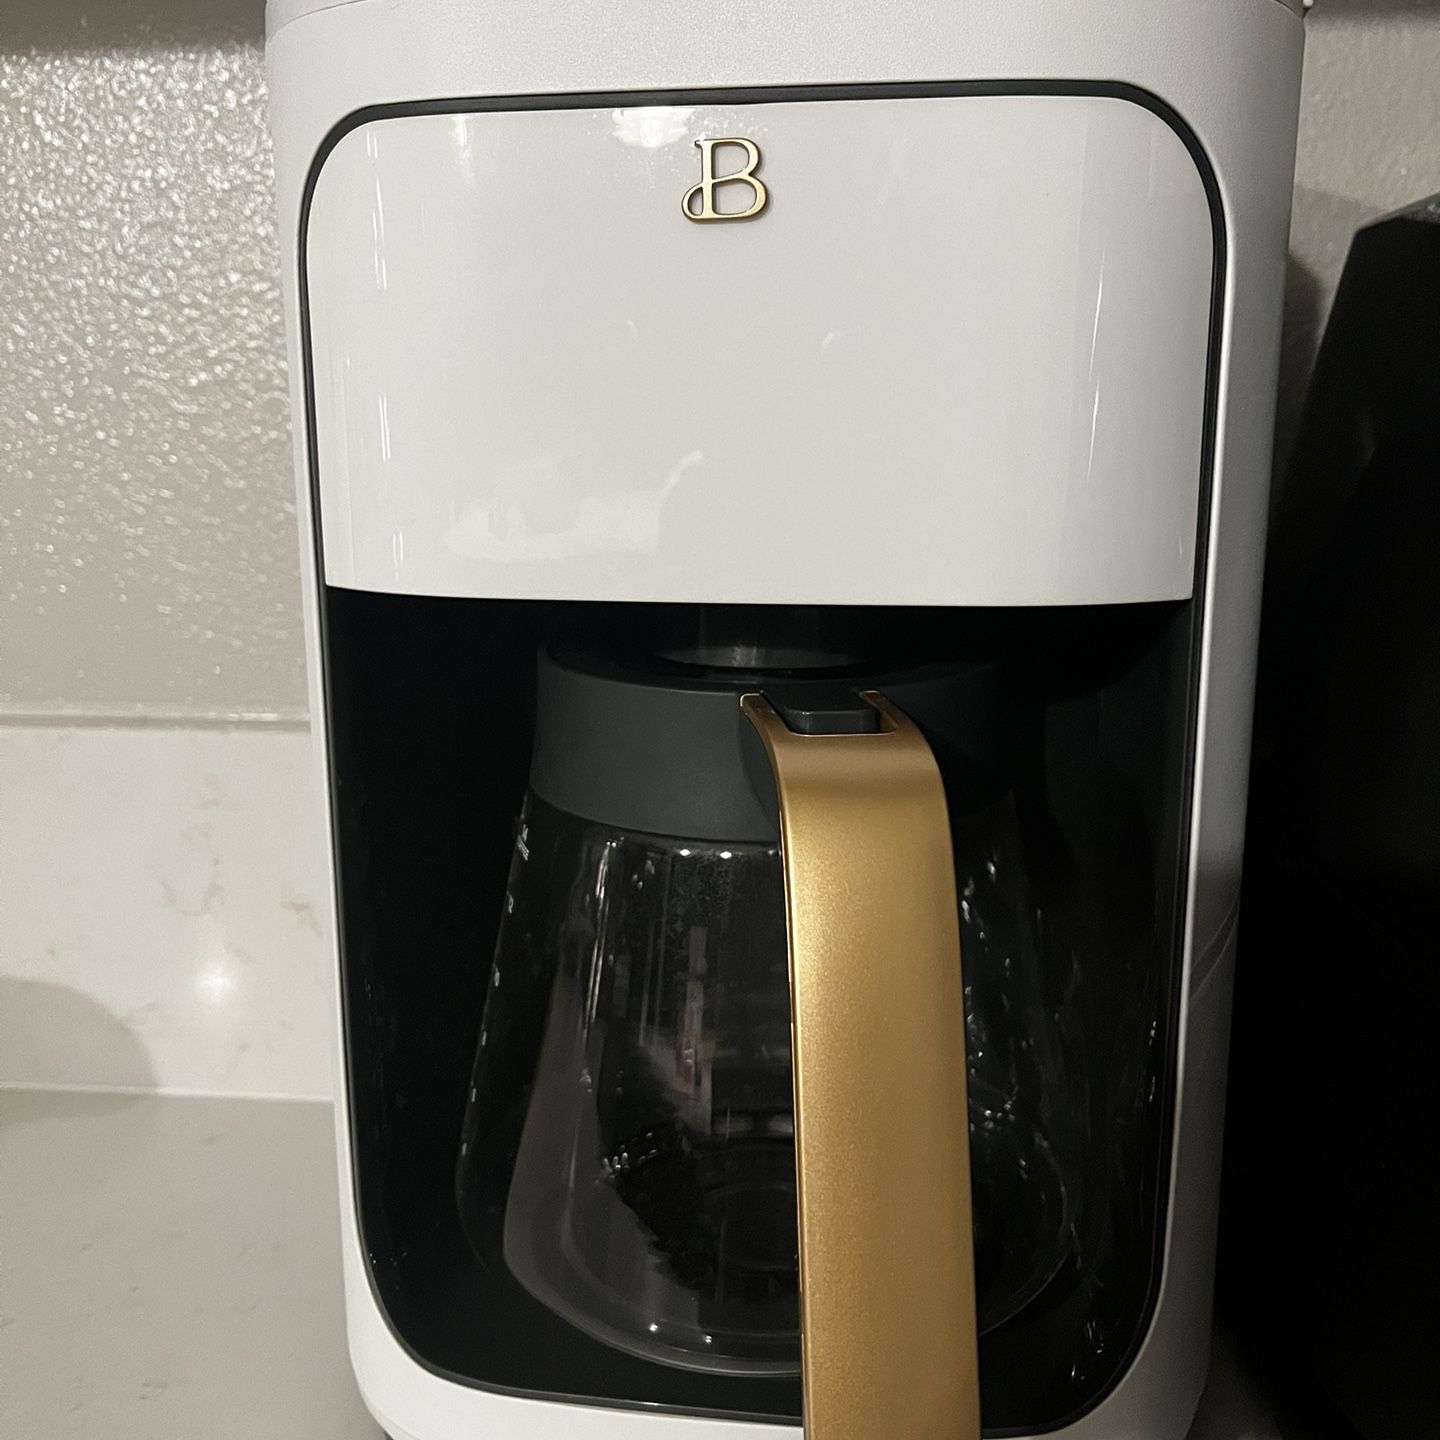 Espresso Keurig machine with latte frother for Sale in Fresno, CA - OfferUp